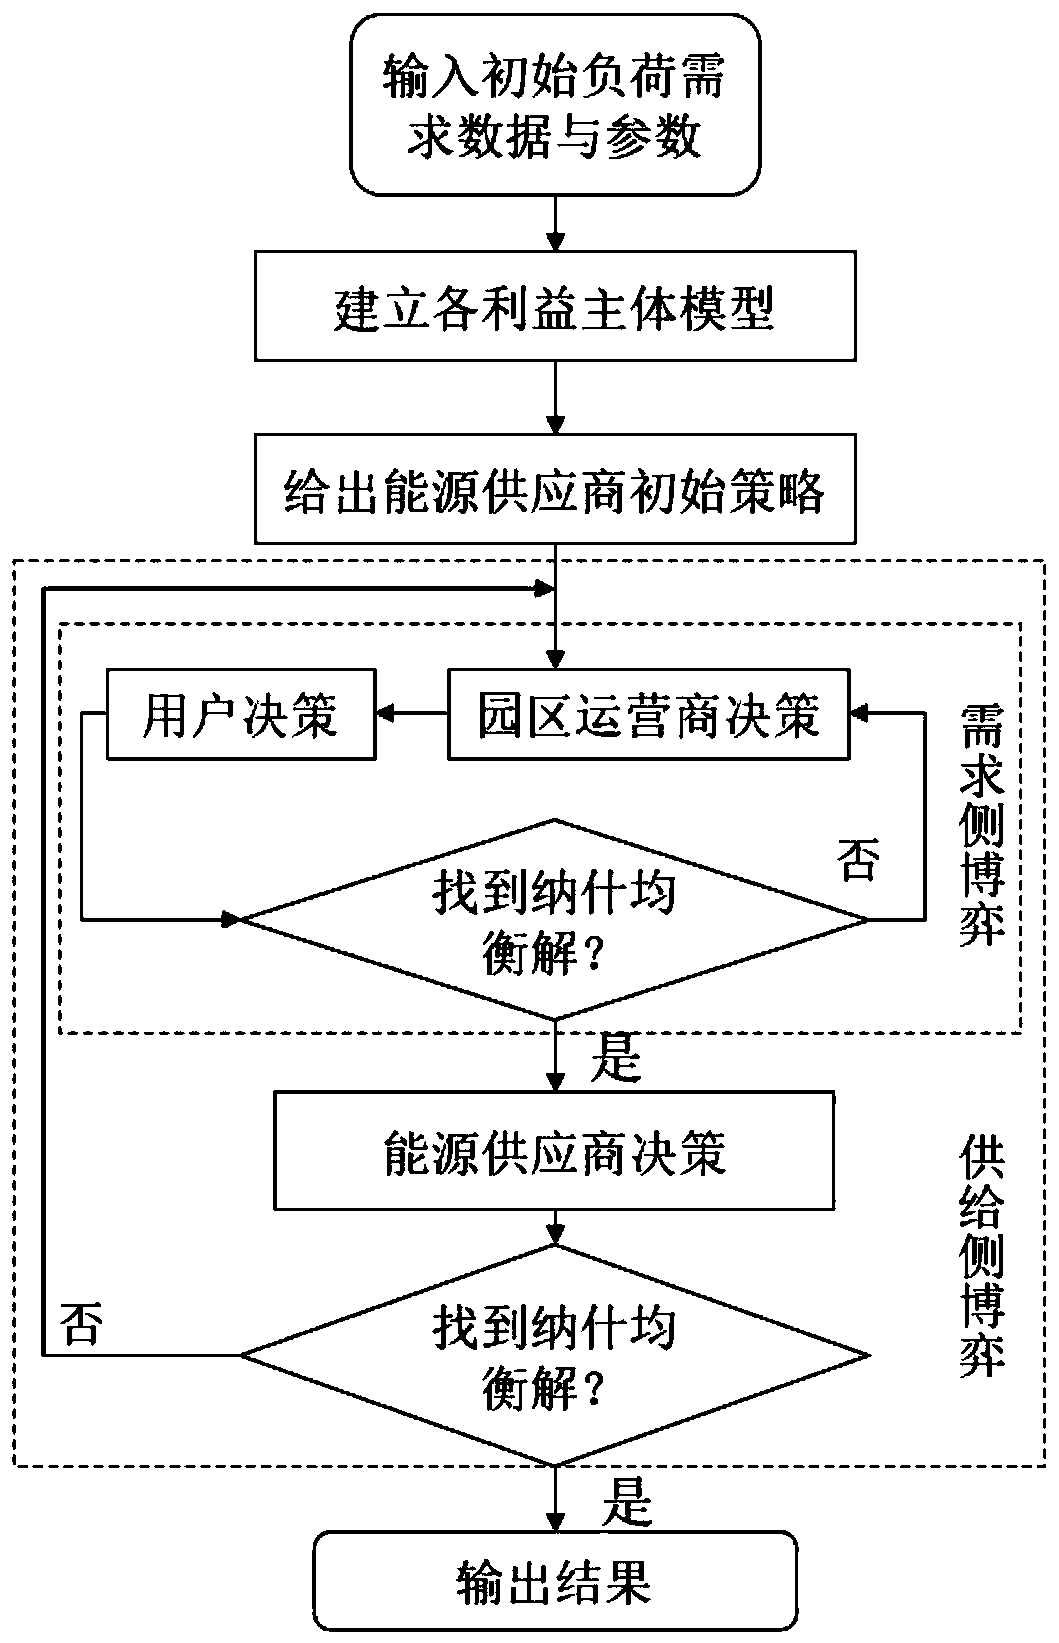 Park operator energy transaction optimization decision-making method based on supply and demand game interaction